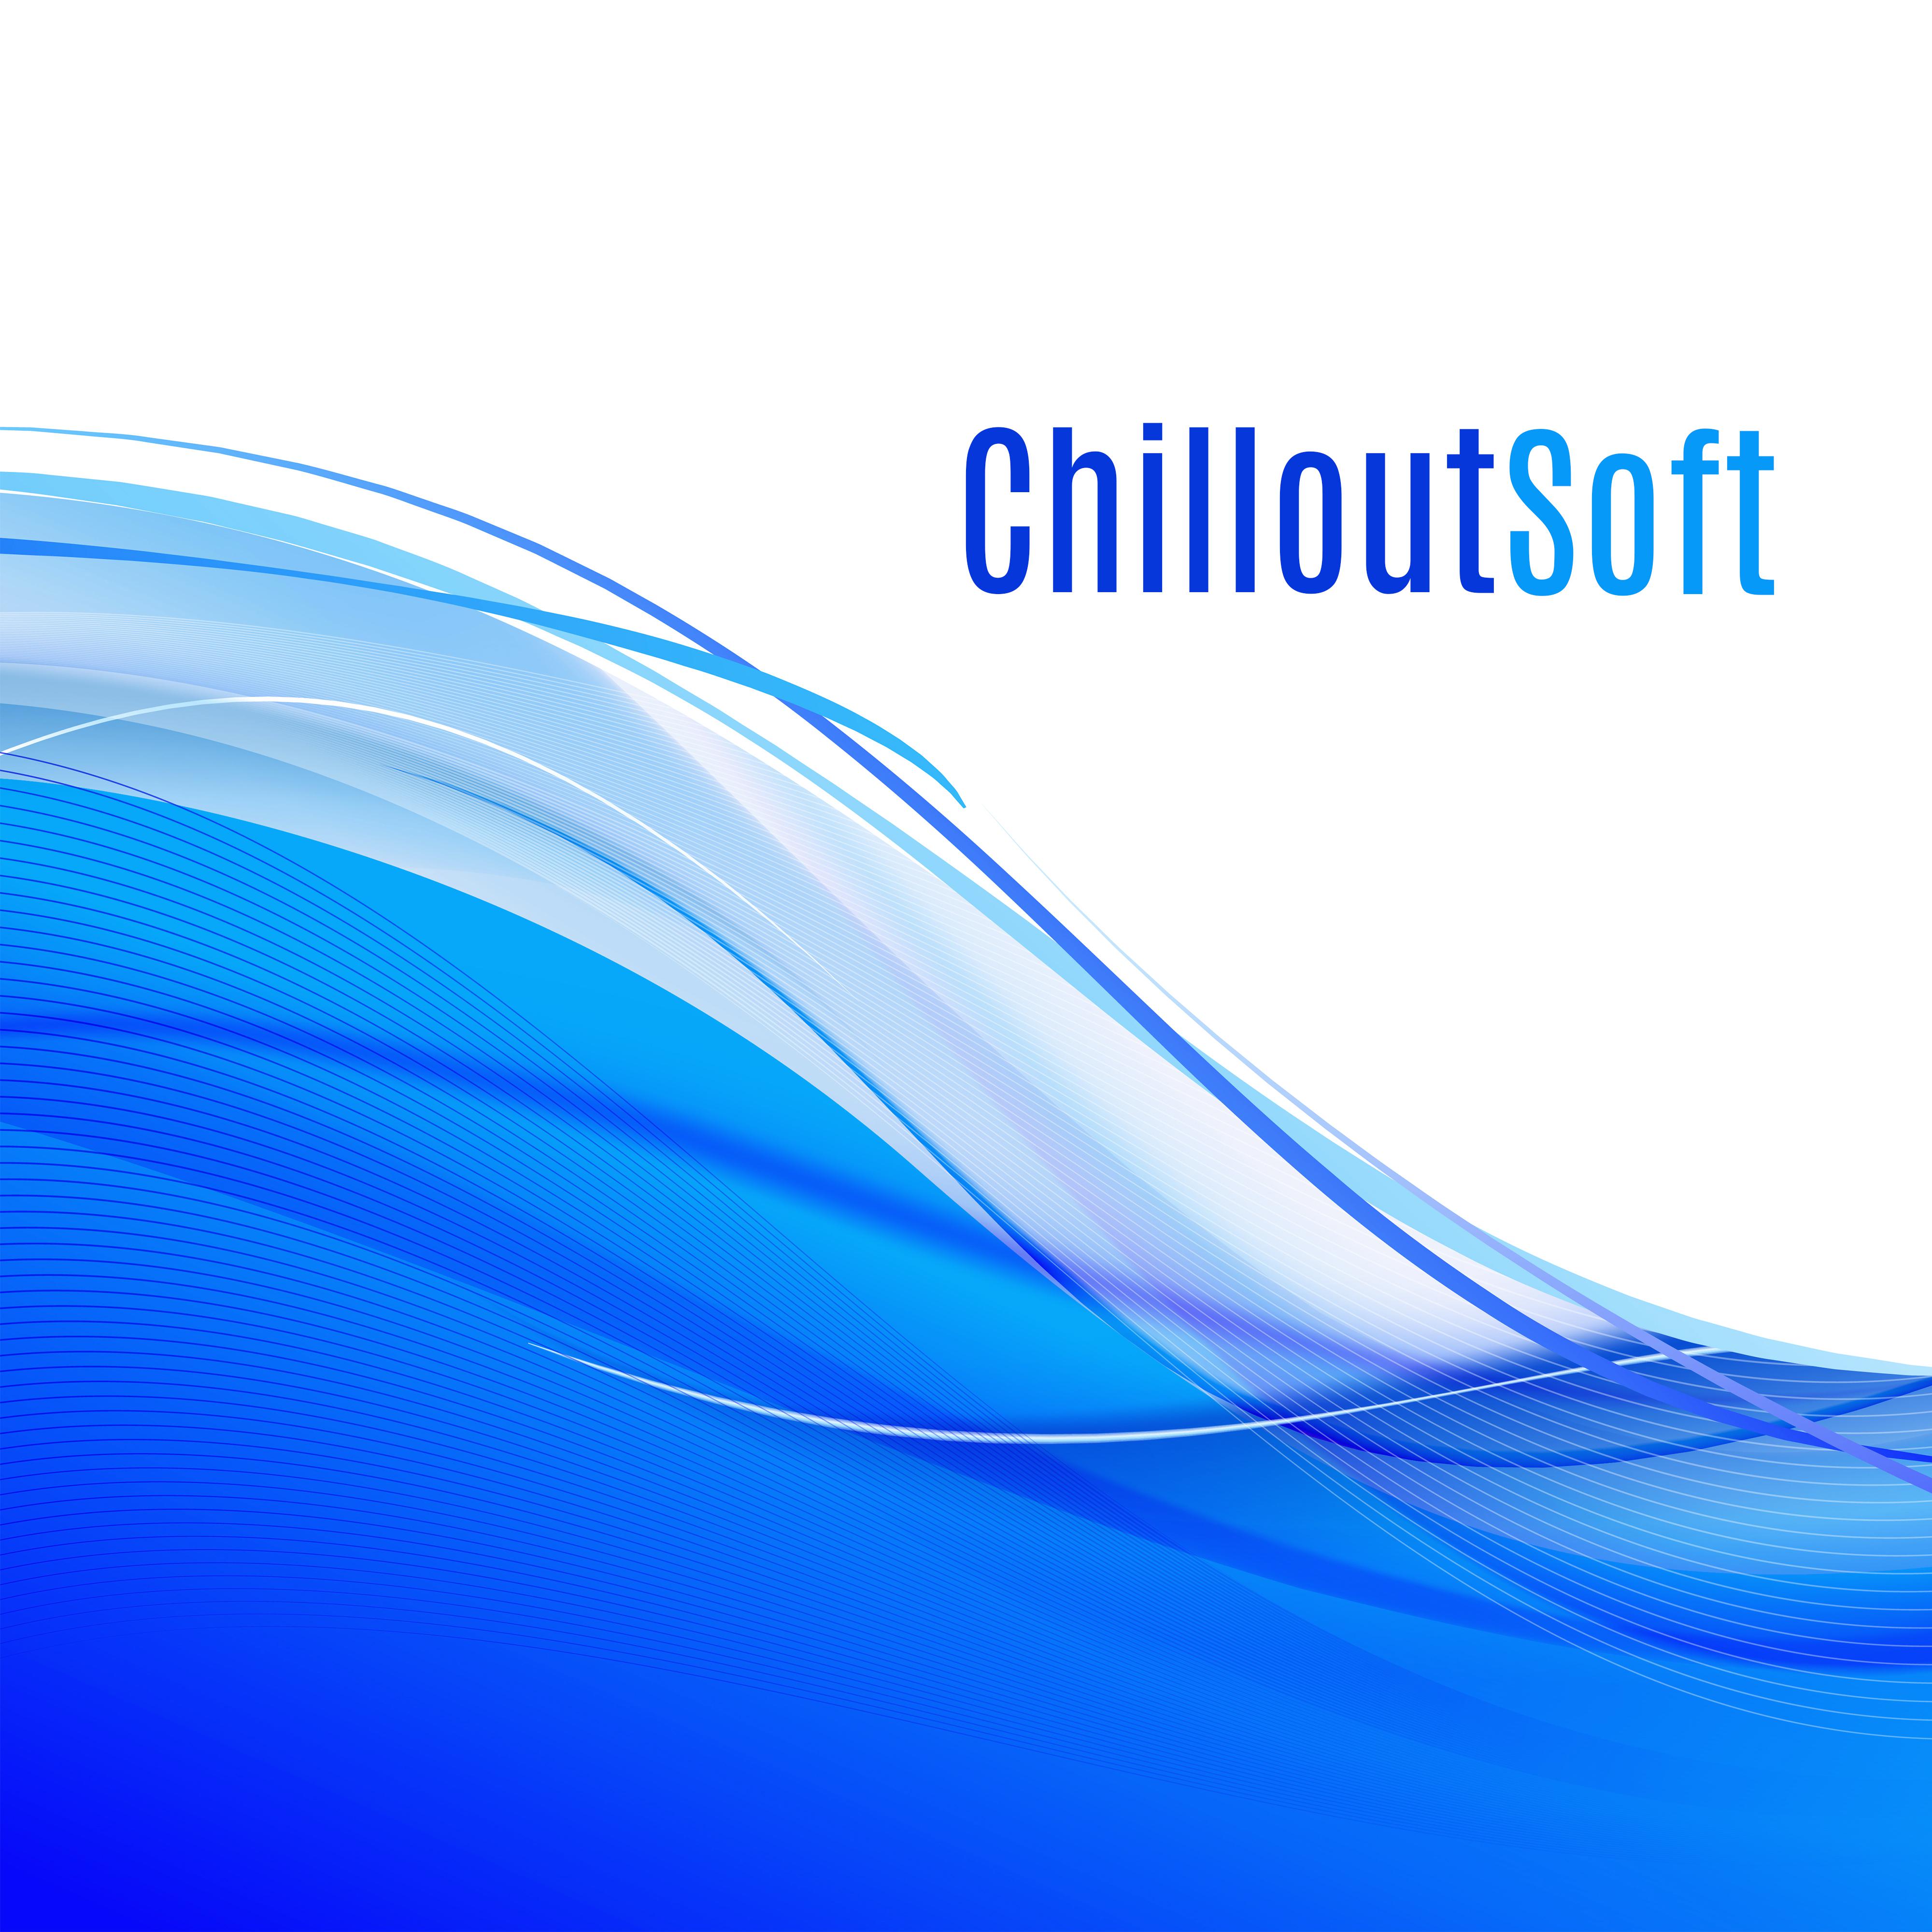 Chillout Soft